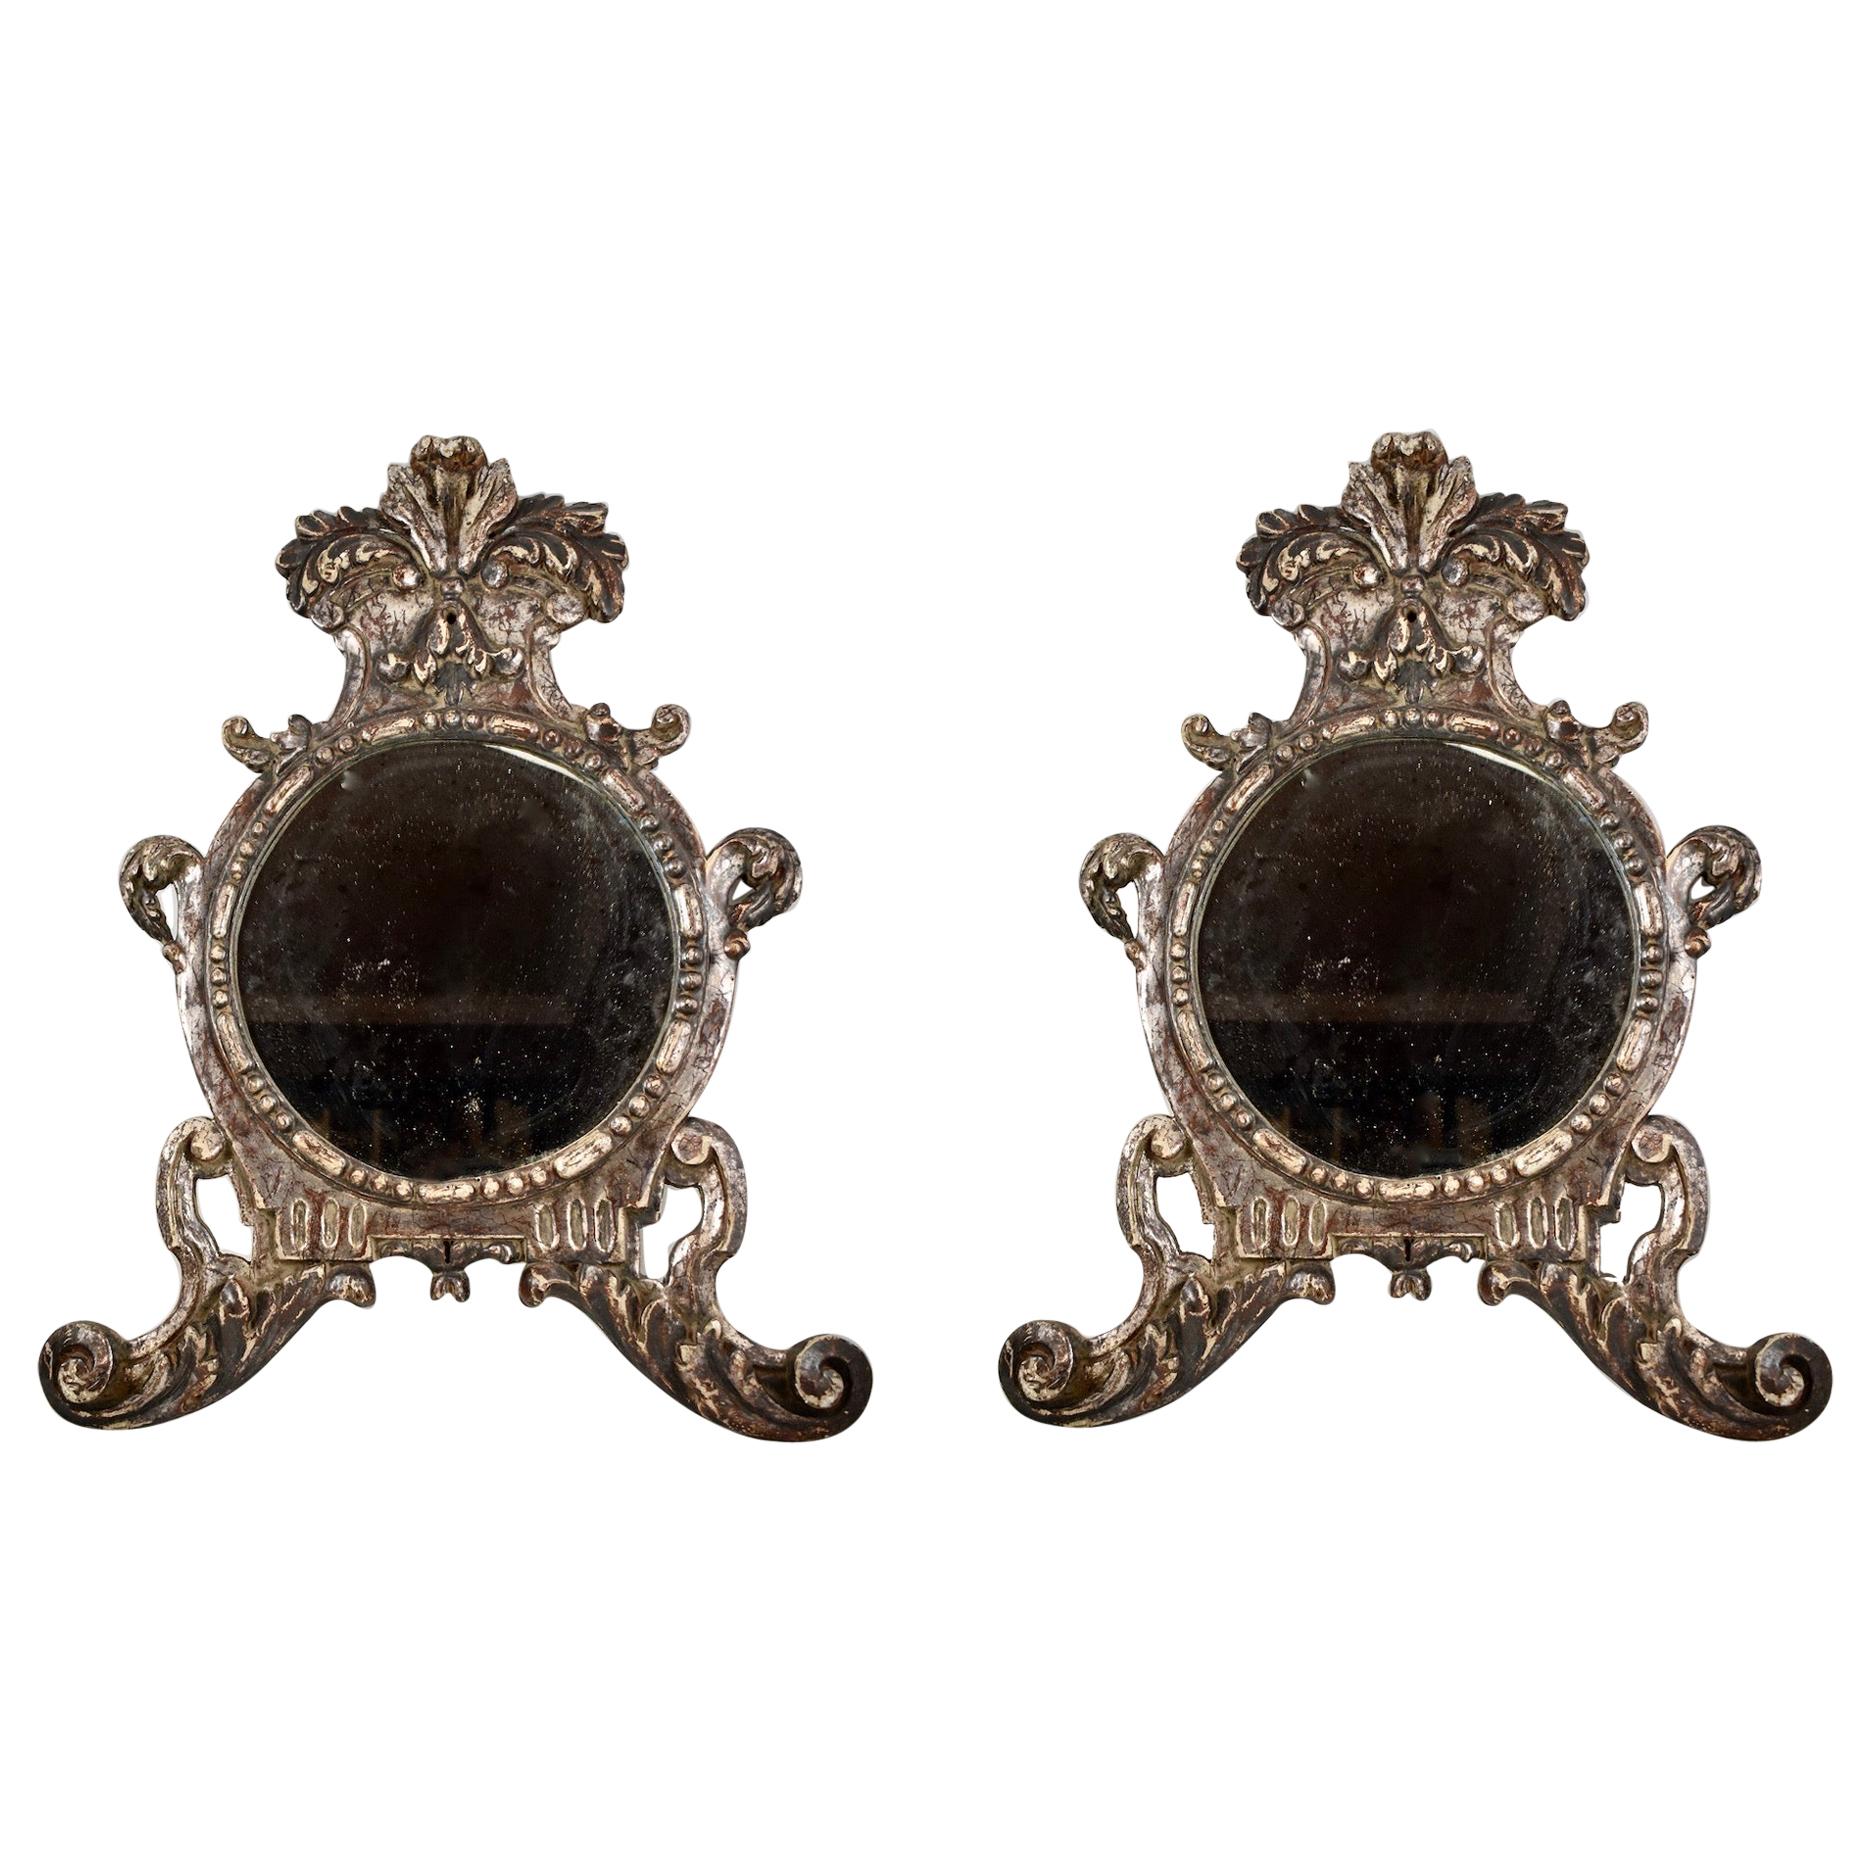 Italian Silver-Gilt Crested and Footed Baroque Revival Wall Mirrors, Pair